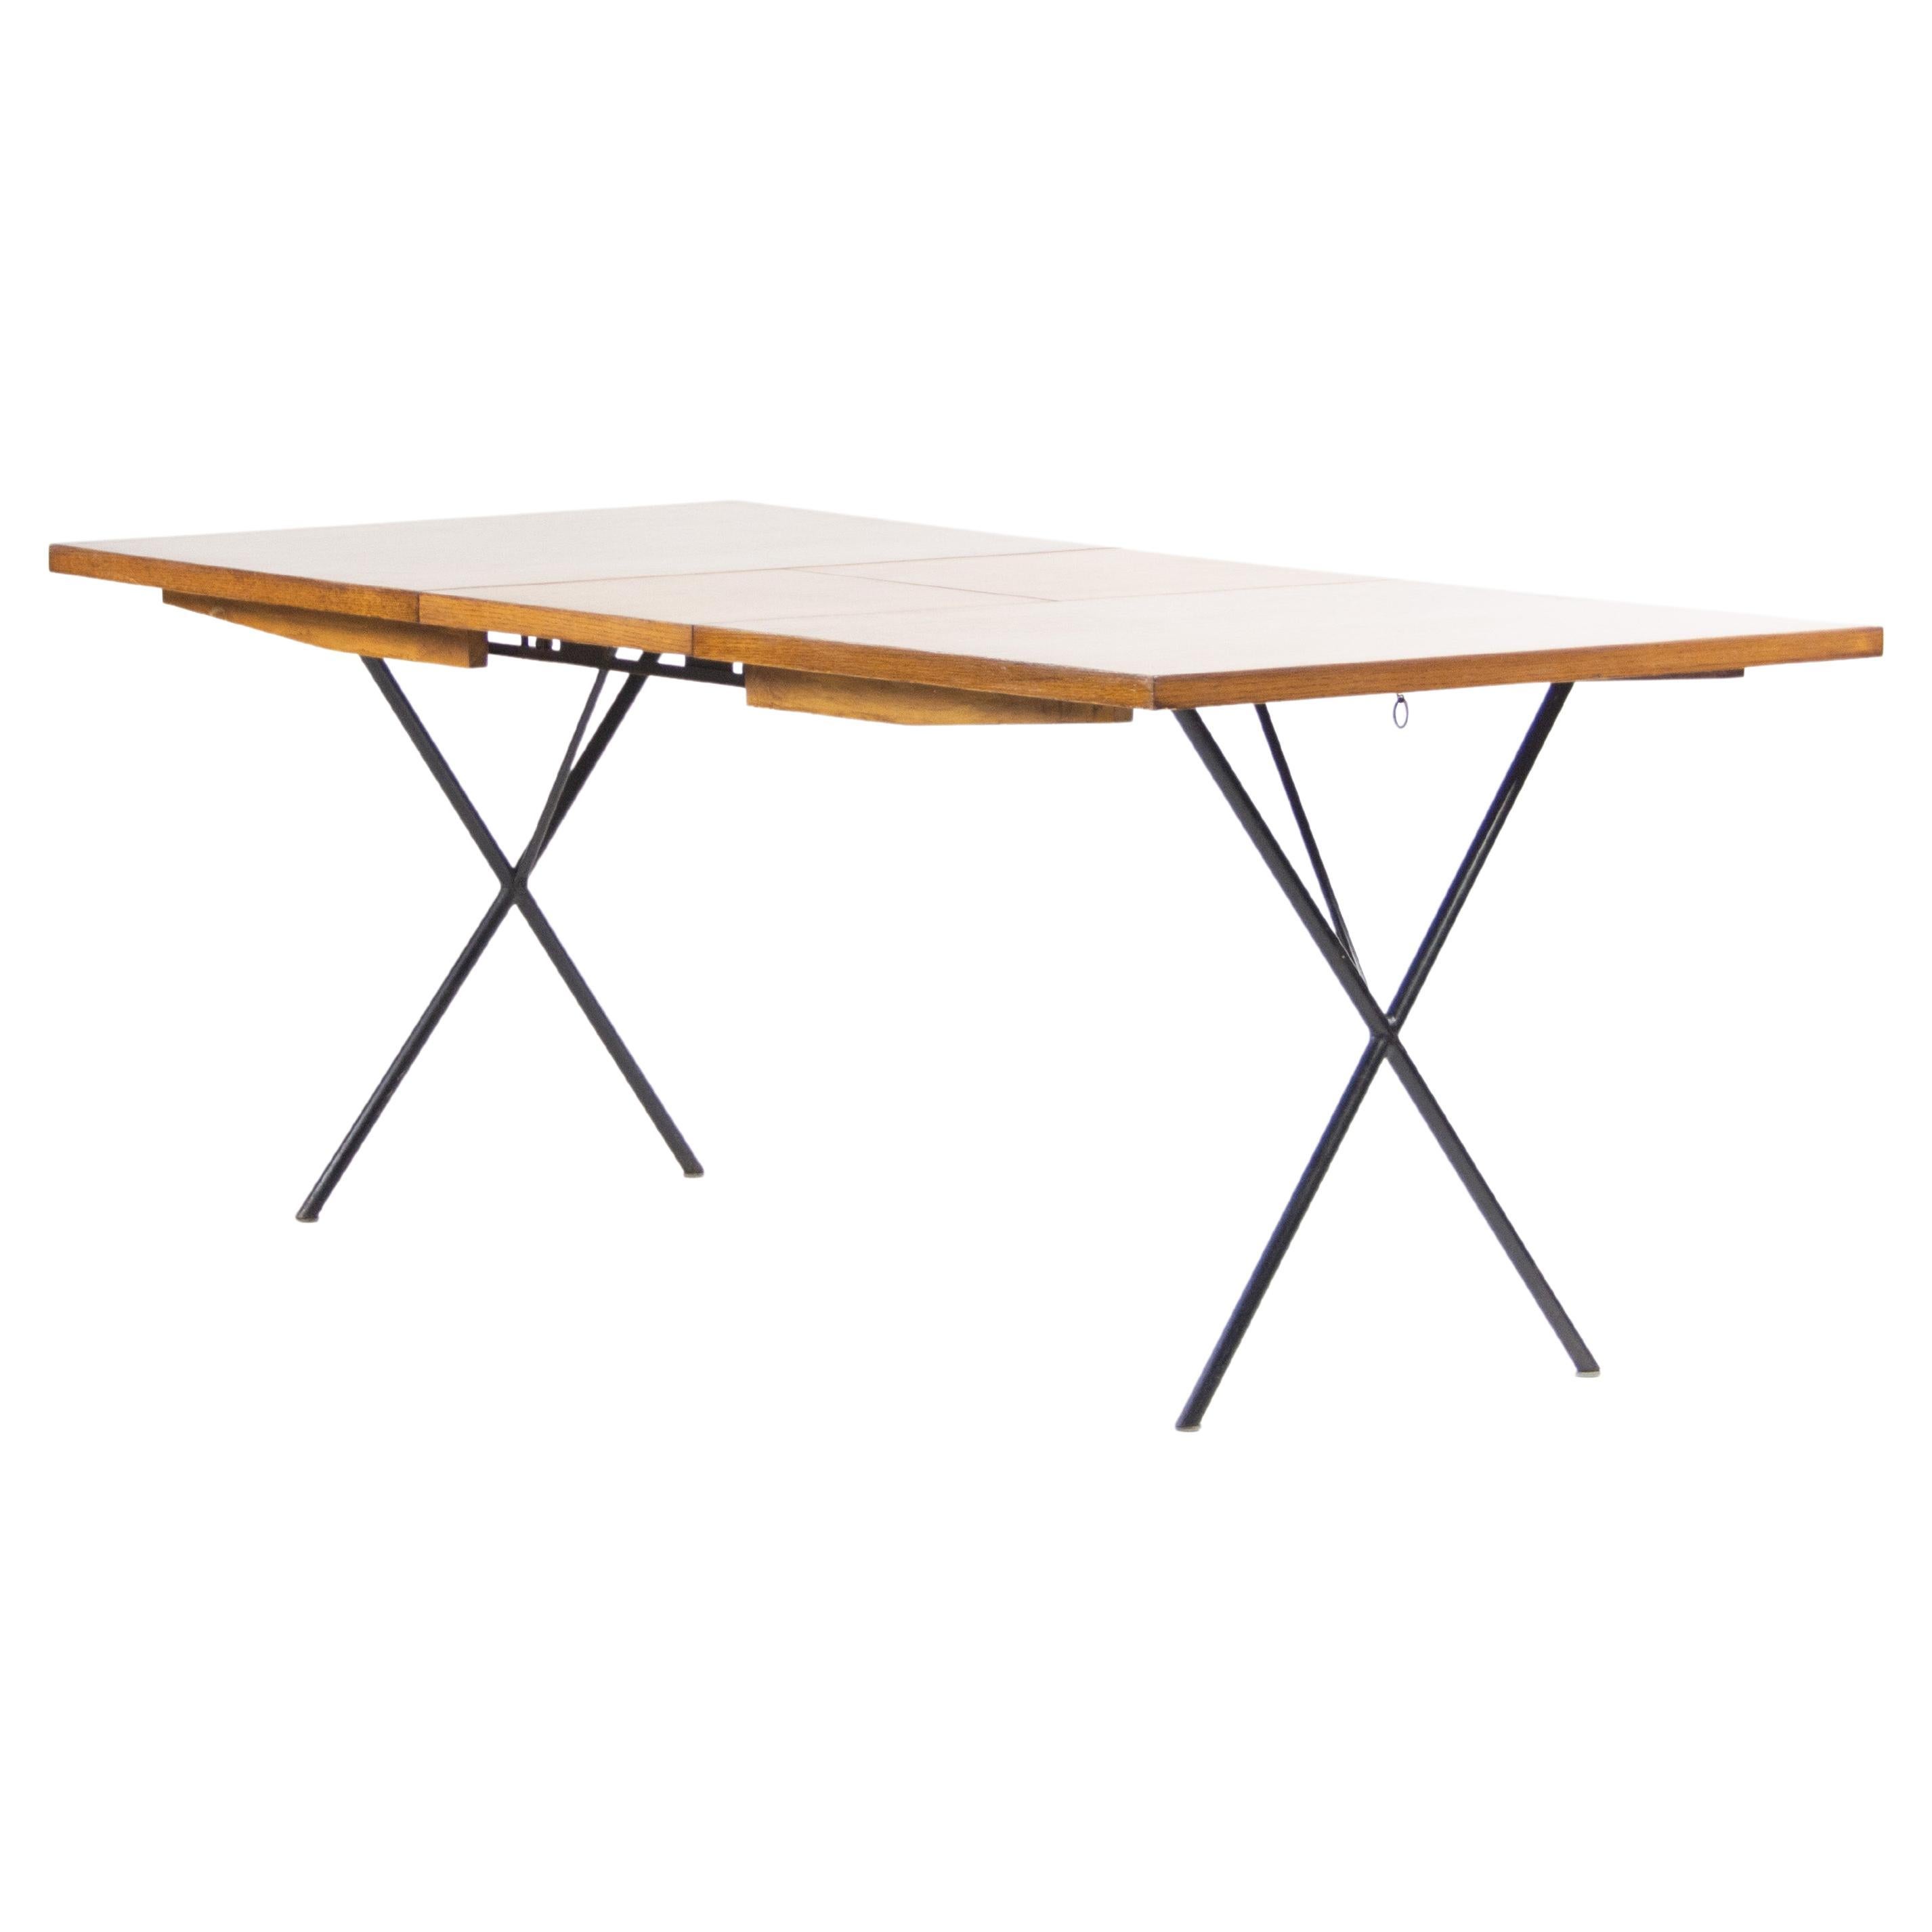 1950's Original George Nelson Herman Miller X Leg Extension Dining Table 5260 For Sale